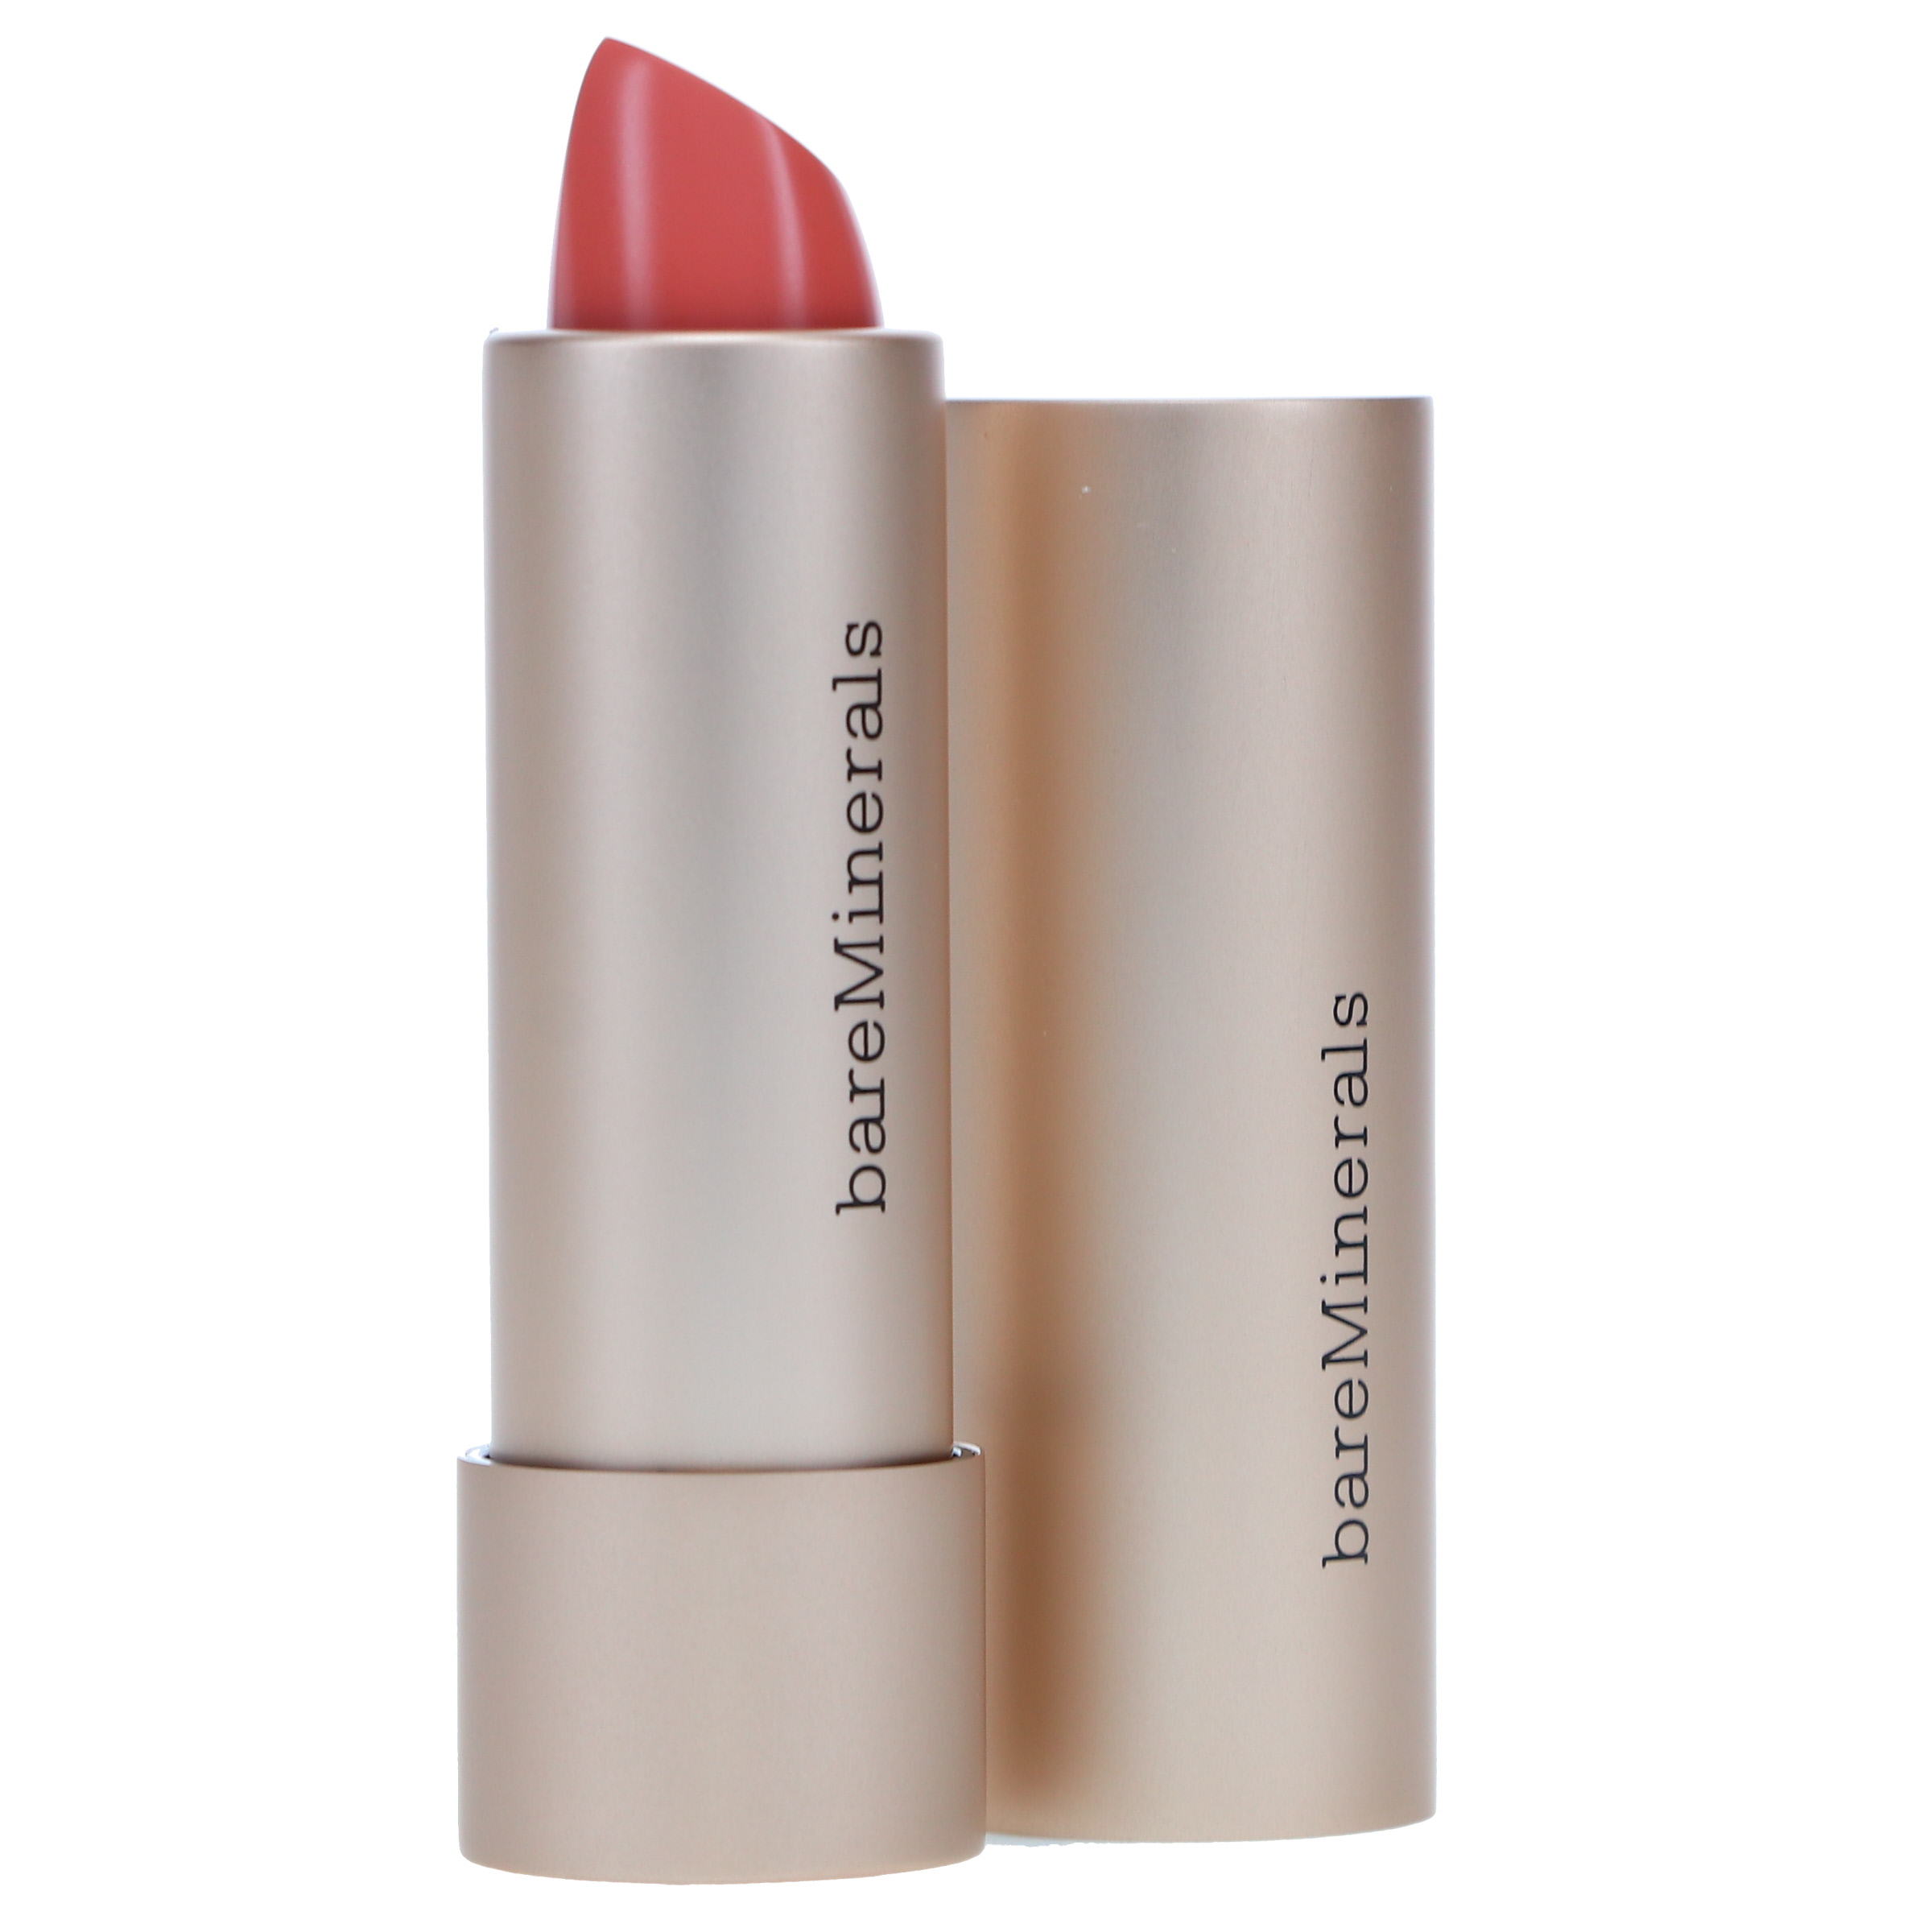 bareMinerals Mineralist Hydra-Smoothing Lipstick Grace 0.12 oz - image 5 of 8